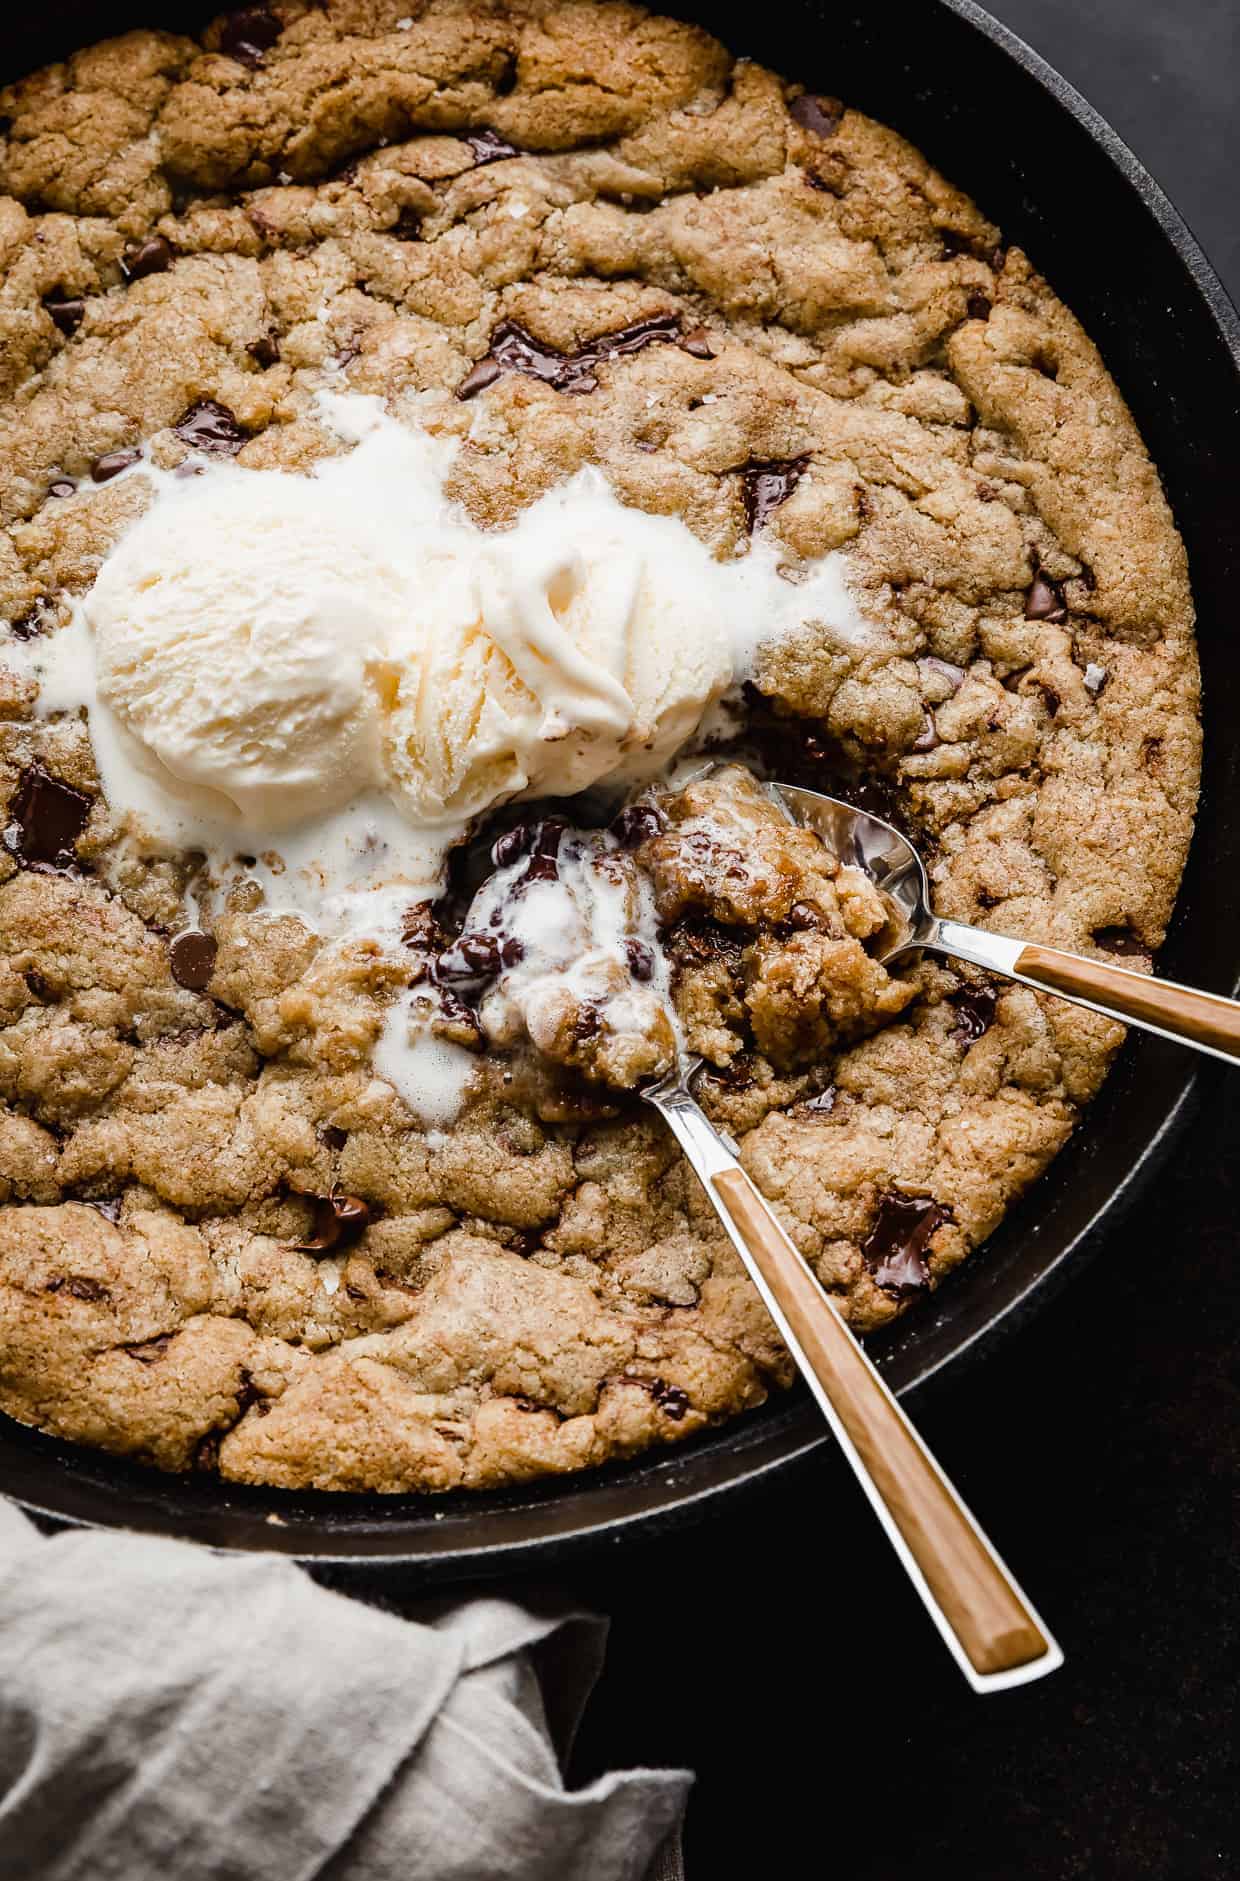 Two spoons scooping up skillet chocolate chip cookie that has been topped with vanilla ice cream. 